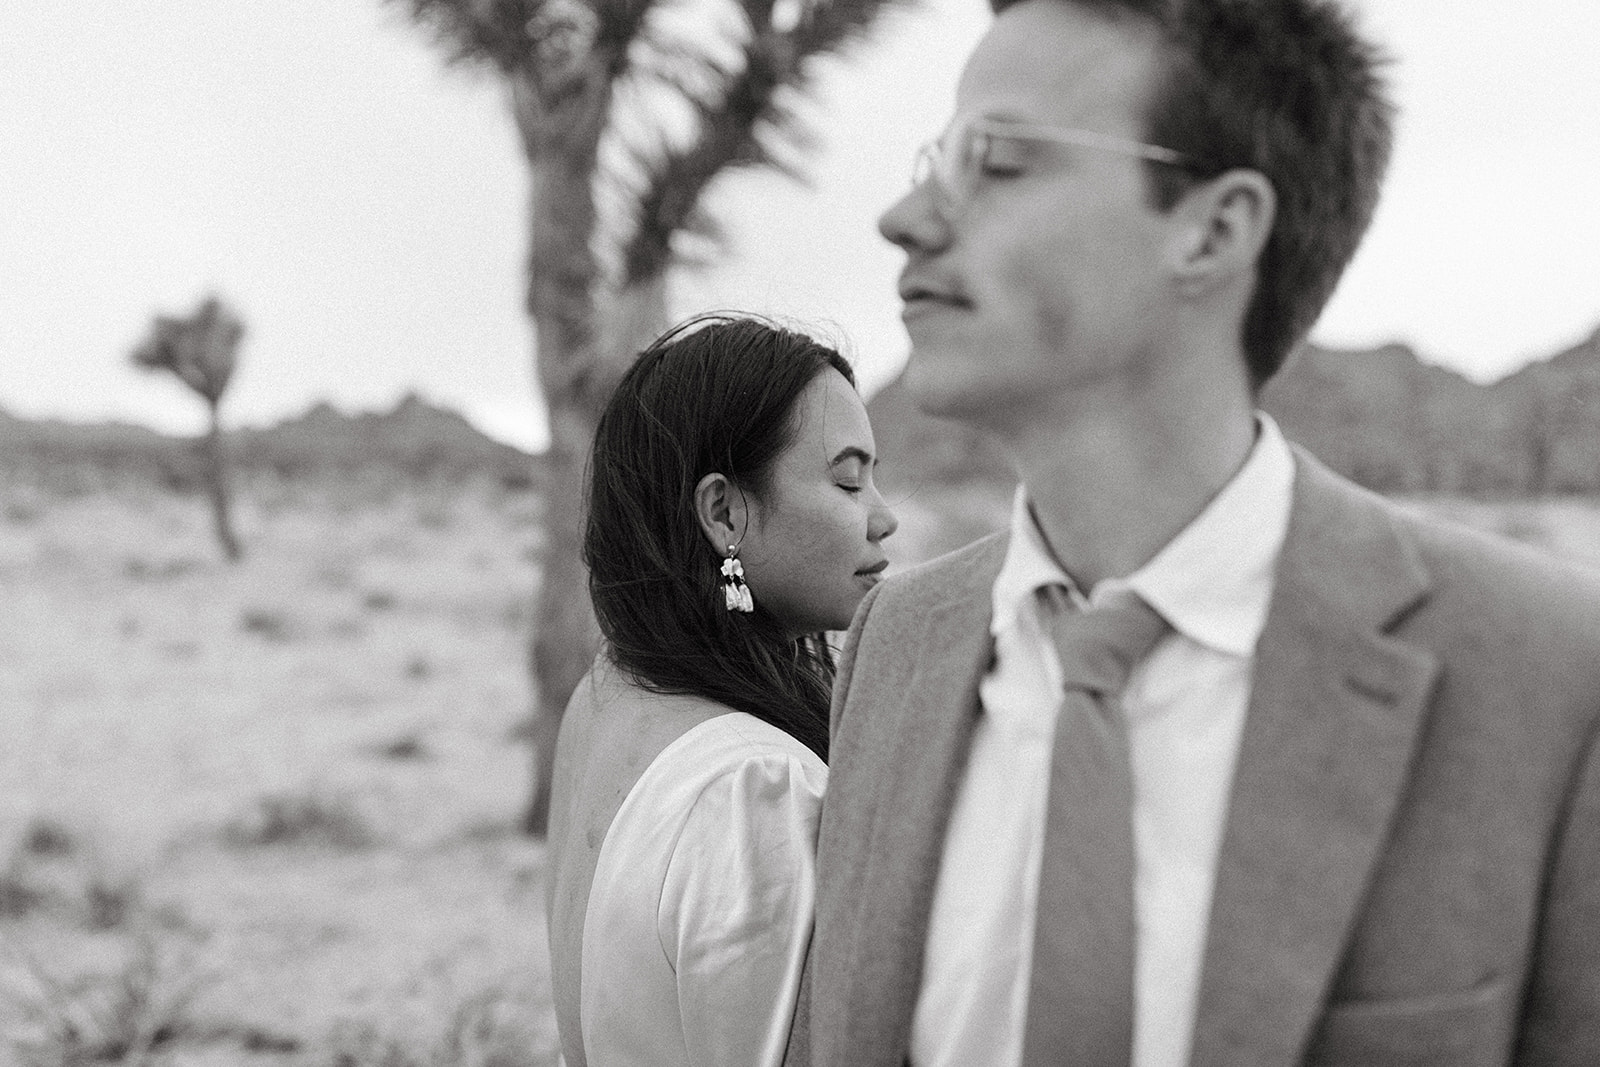 A couple who eloped in Joshua Tree National Park